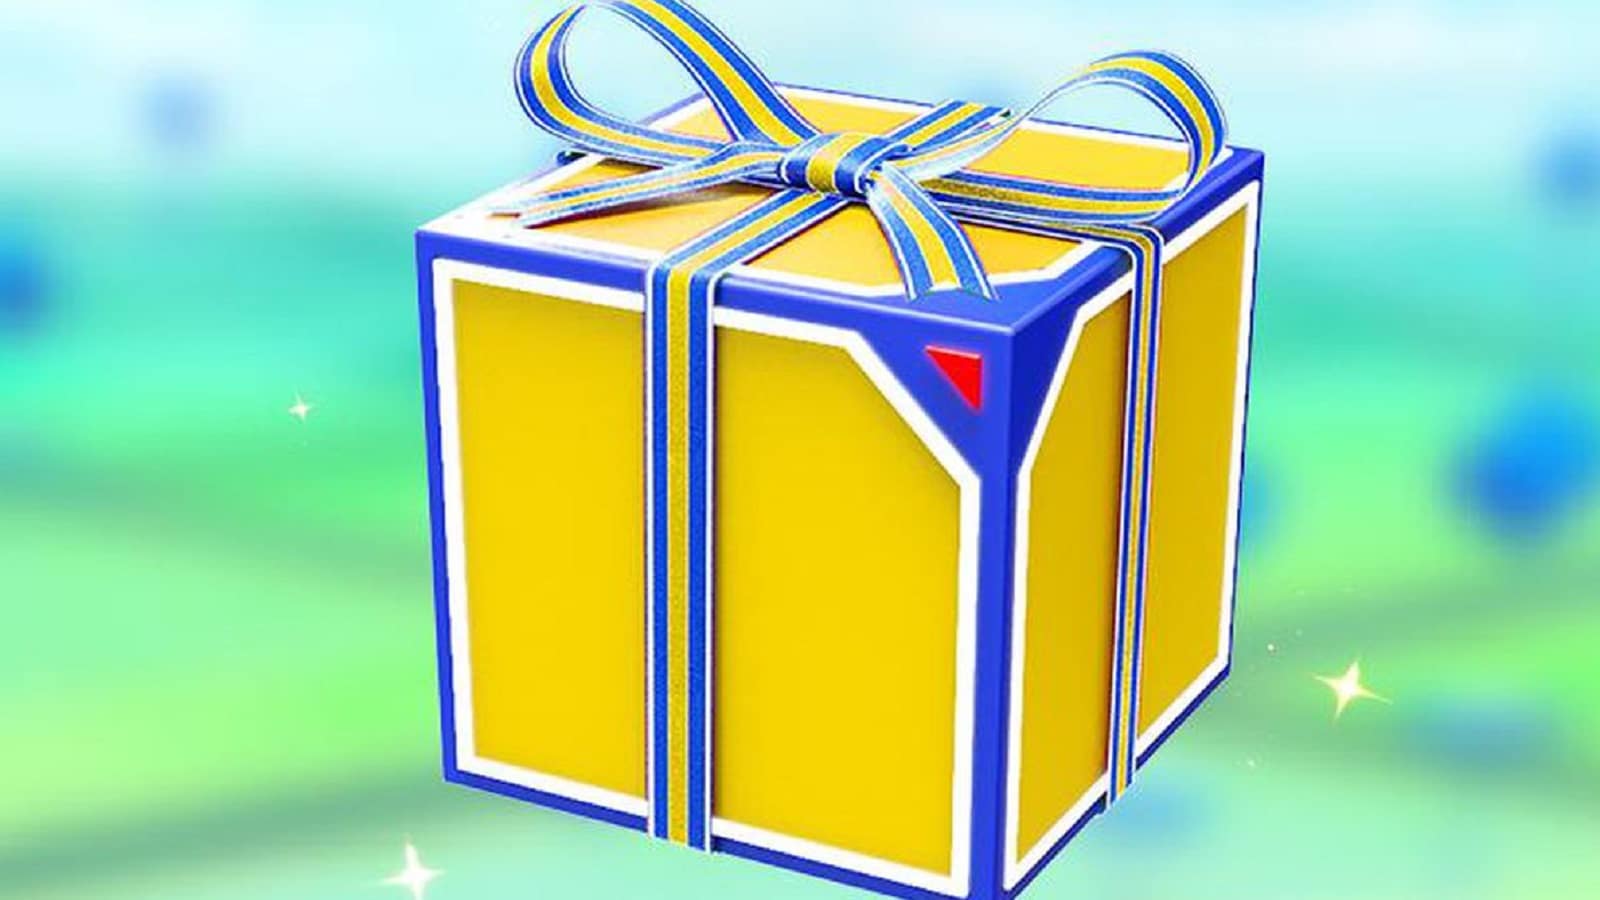 Pokemon Go players mourn on 1-year anniversary of “good boxes” – Dexerto